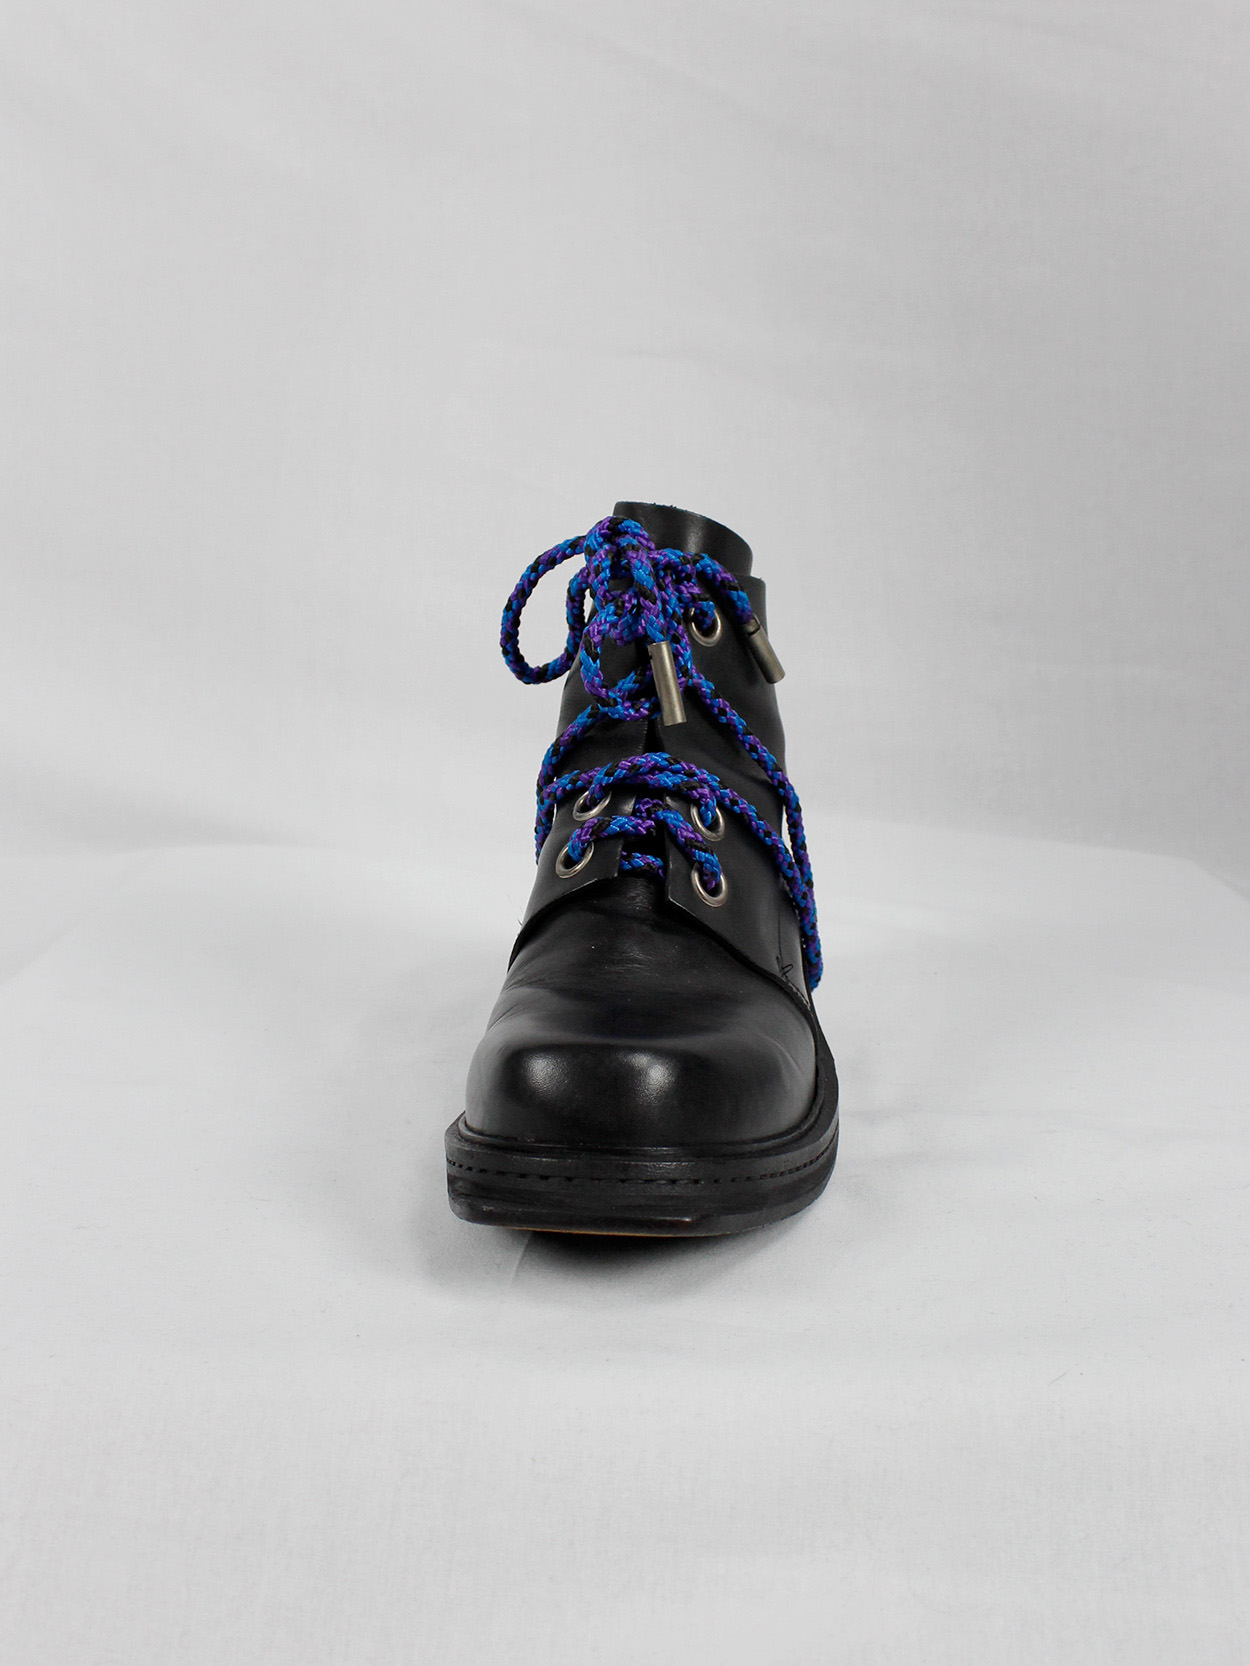 Dirk Bikkembergs black ankle boots with metal slit heel and purple cord fall 1994 (17)